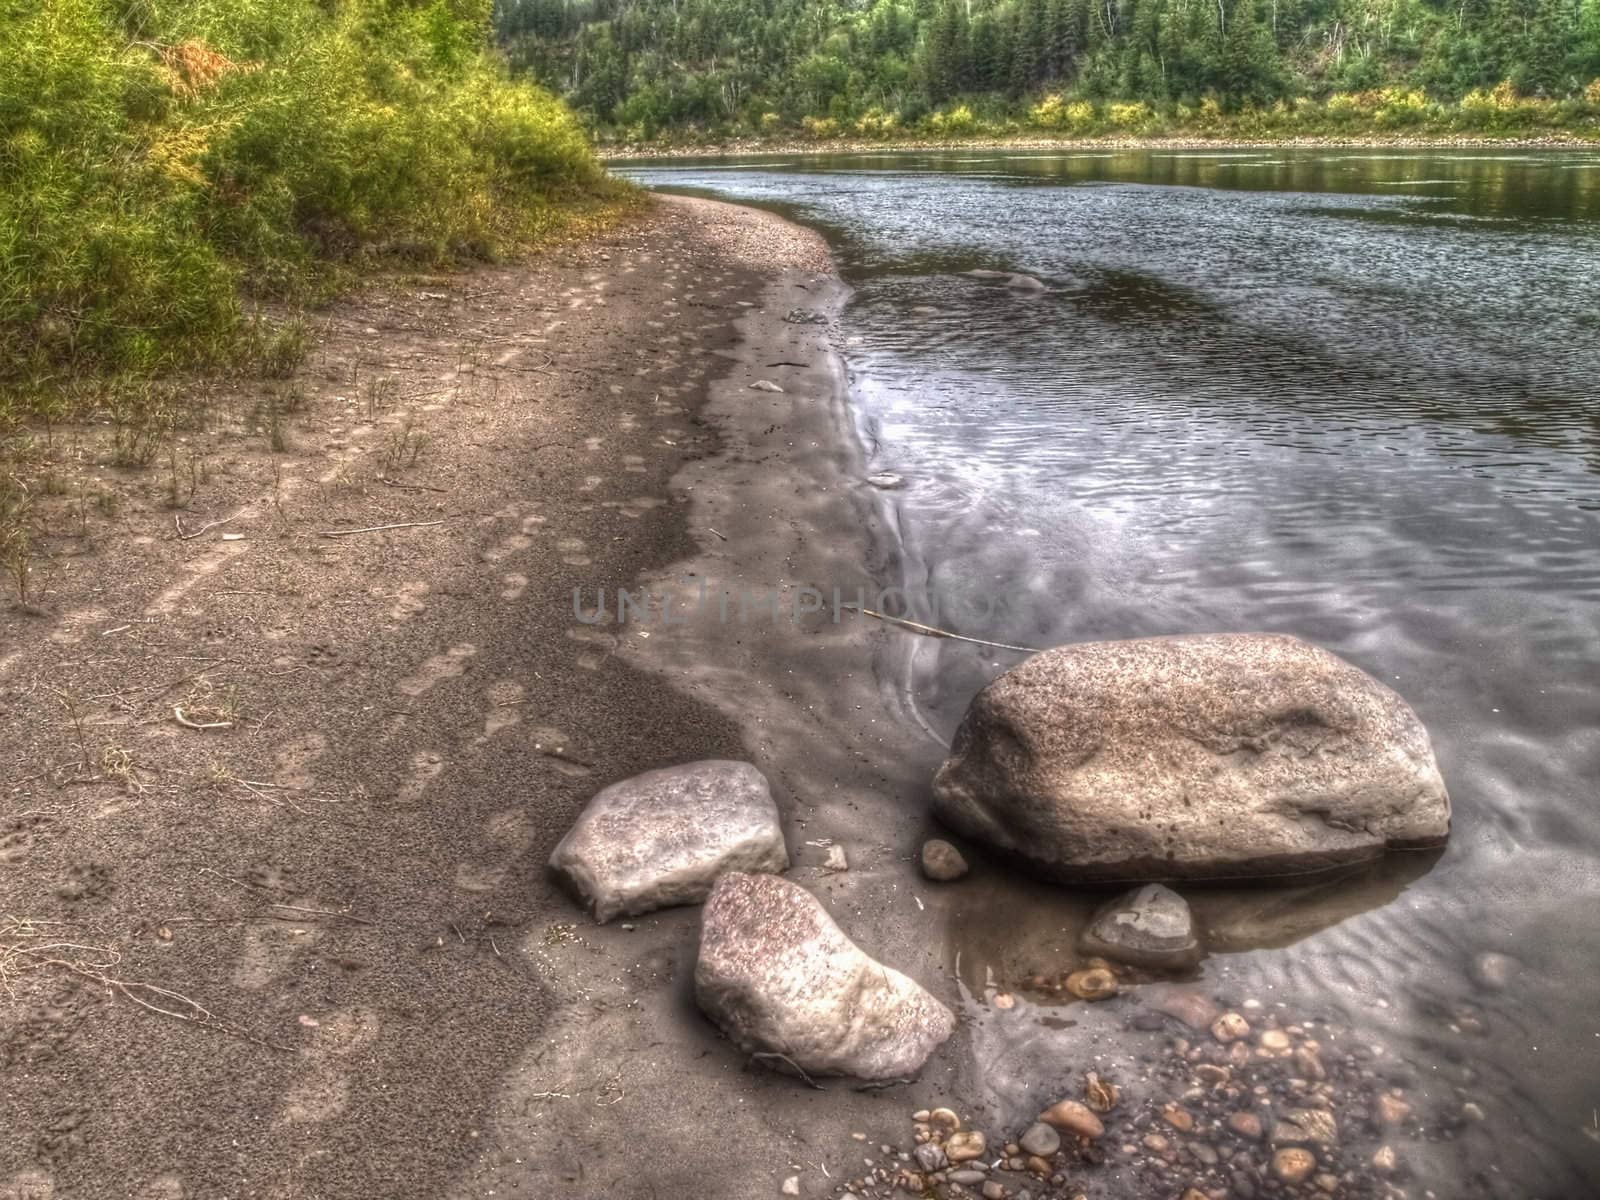 Footprints on the Riverbank by watamyr